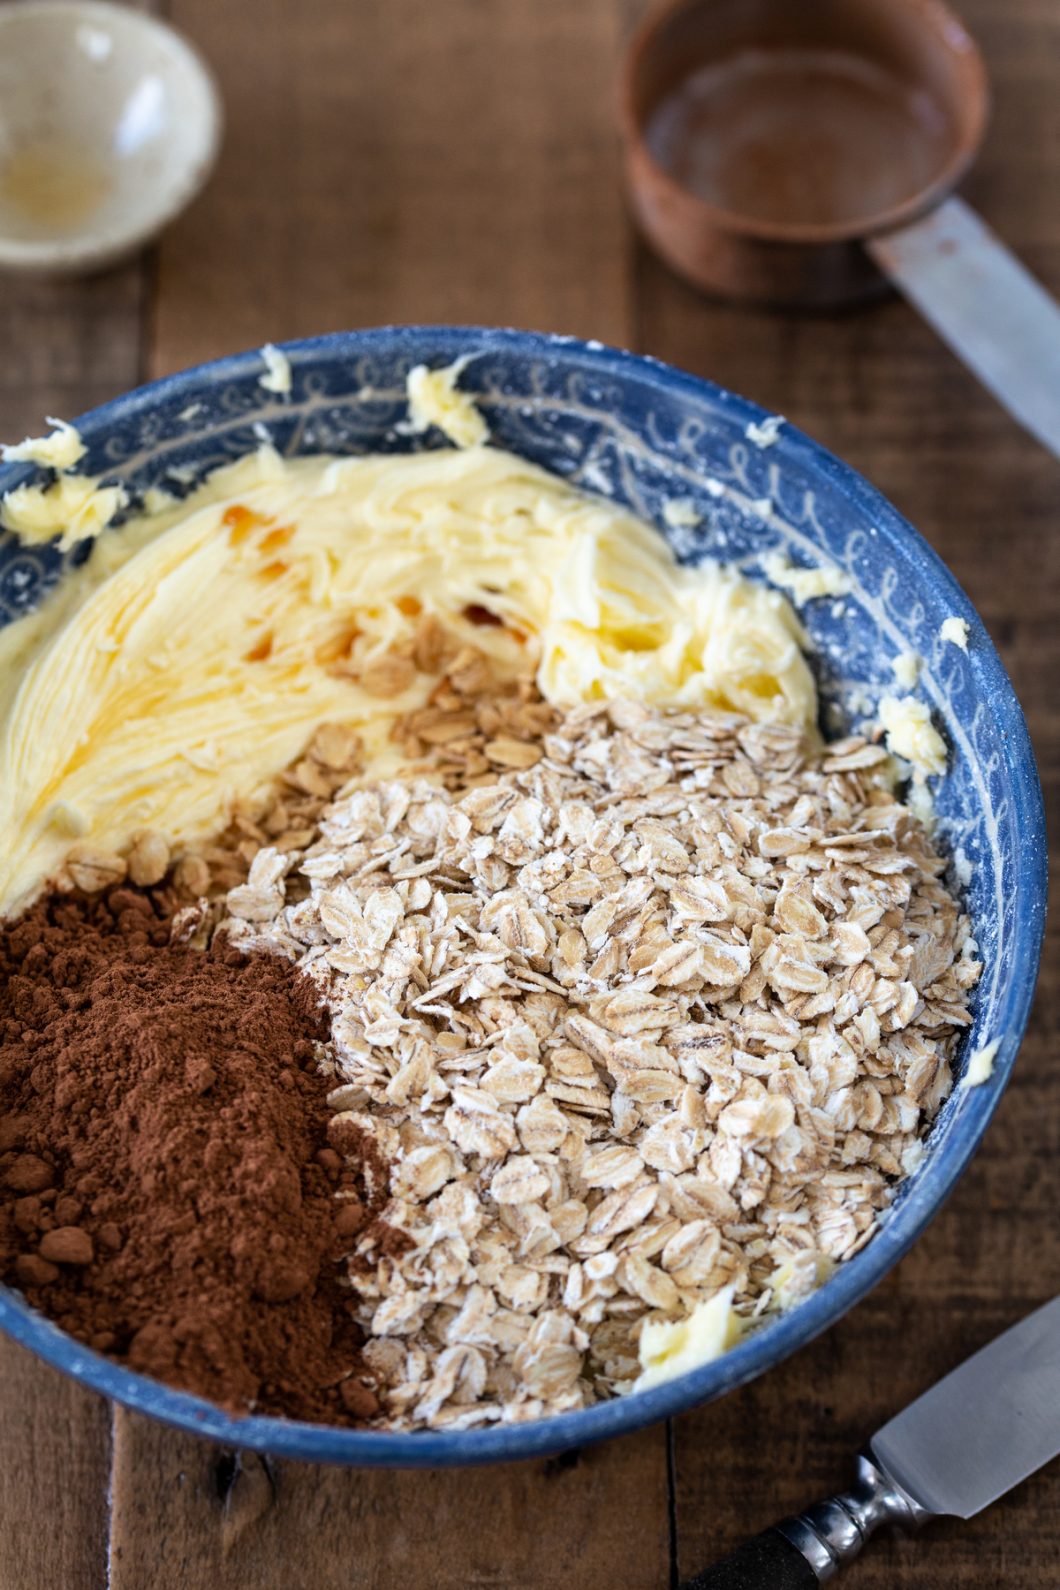 Whipped butter and sugar inb a blue bowl together with rolled oats, cocoa and coffee.